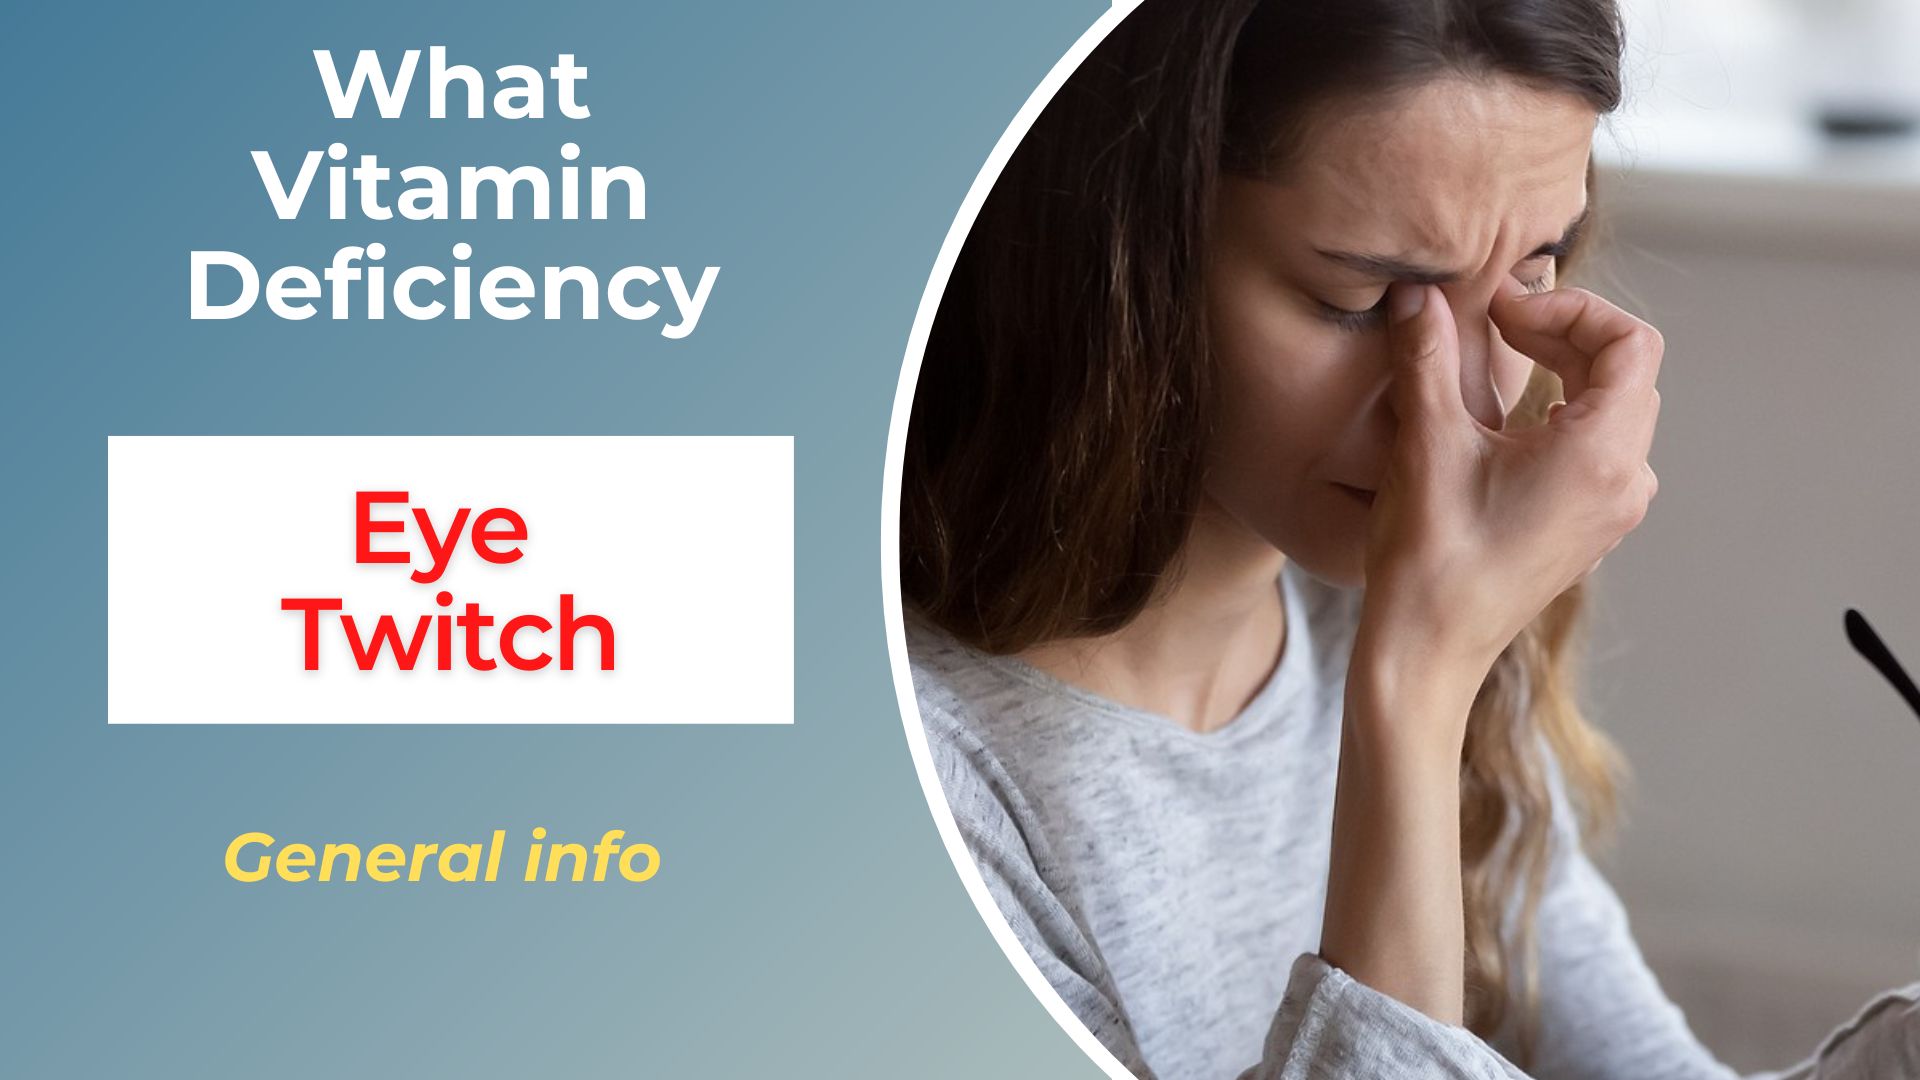 What Vitamin Deficiency Causes Eye Twitch